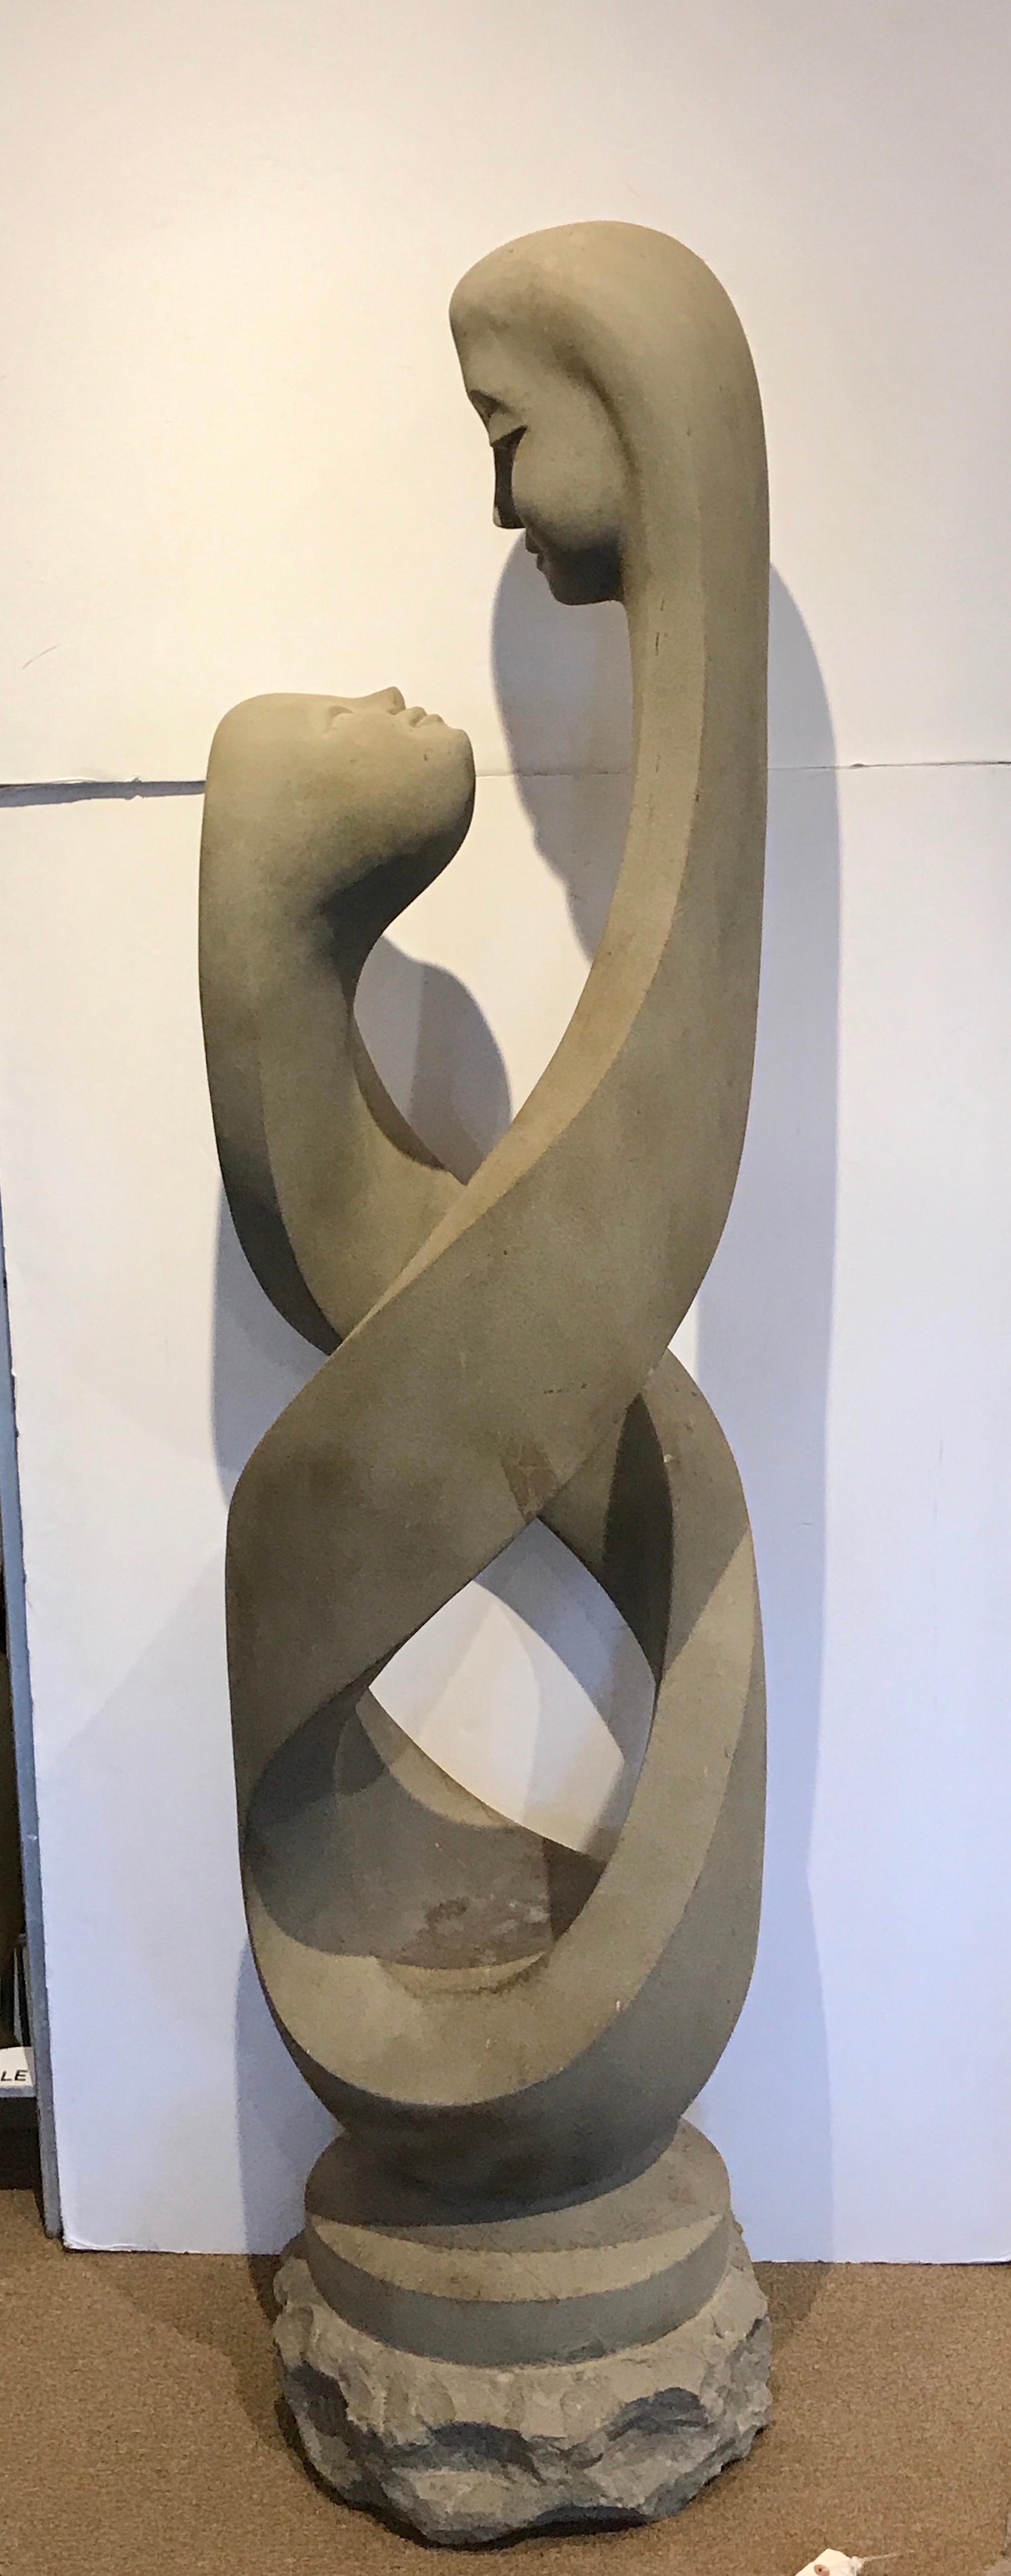 Monumental modern carved limestone spiral sculpture, with two figural heads facing each other. Standing 76